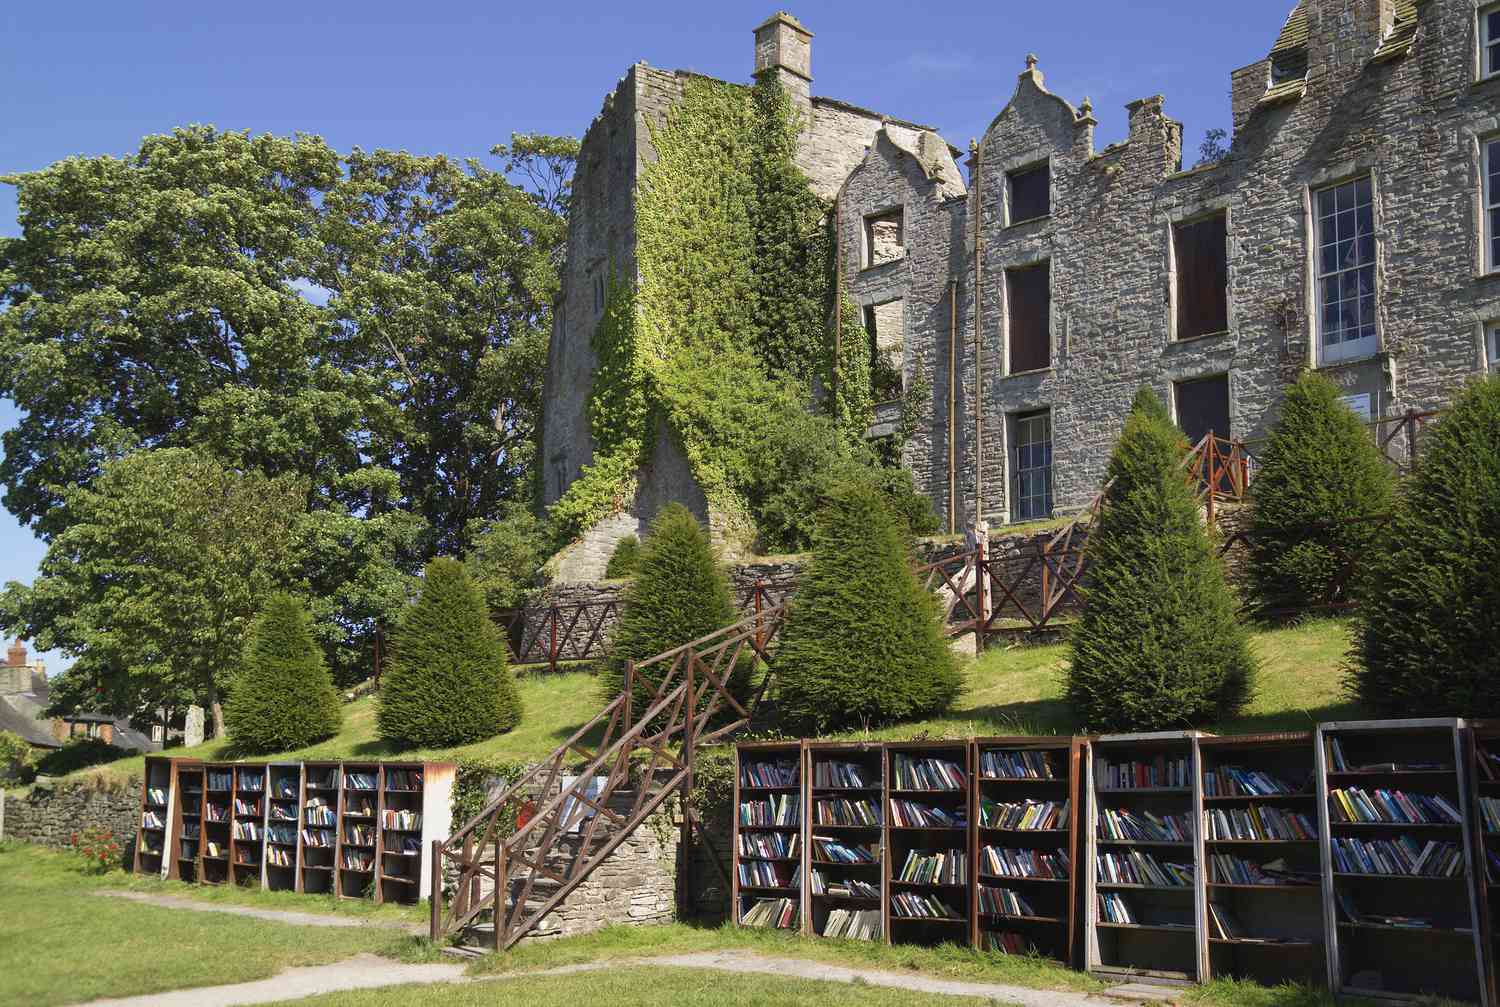 This Whimsical Town in Wales Is a Must-Visit for Bookworms